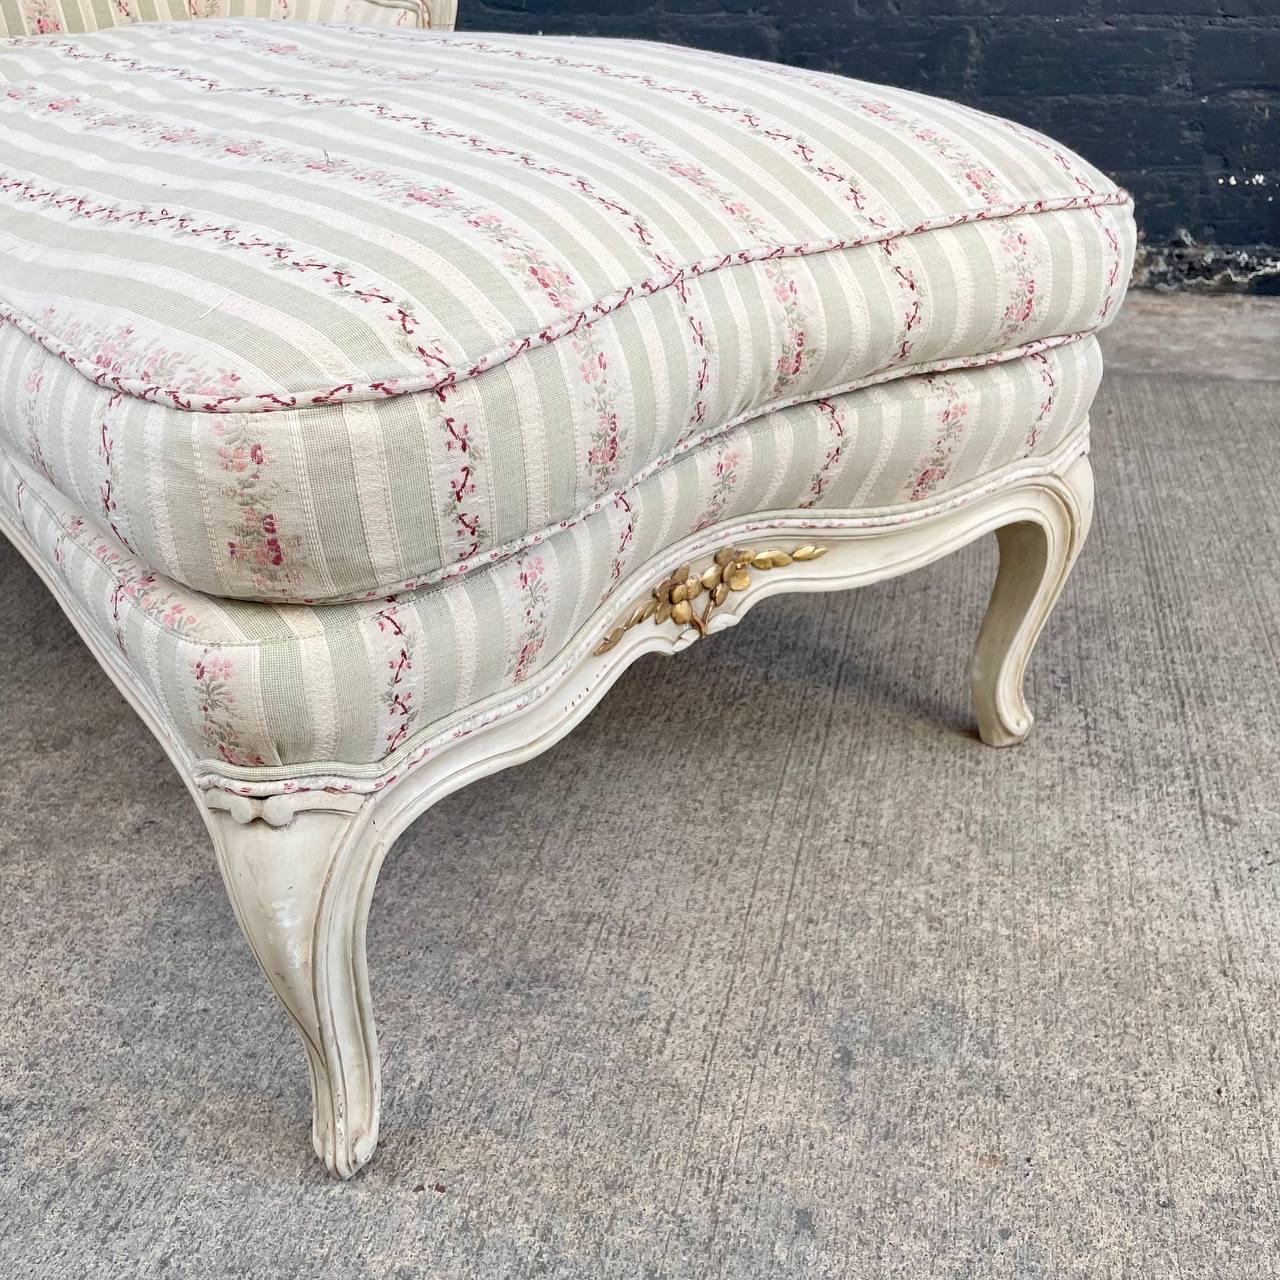 Upholstery Vintage French Provincial Style Chaise Lounge Chair For Sale